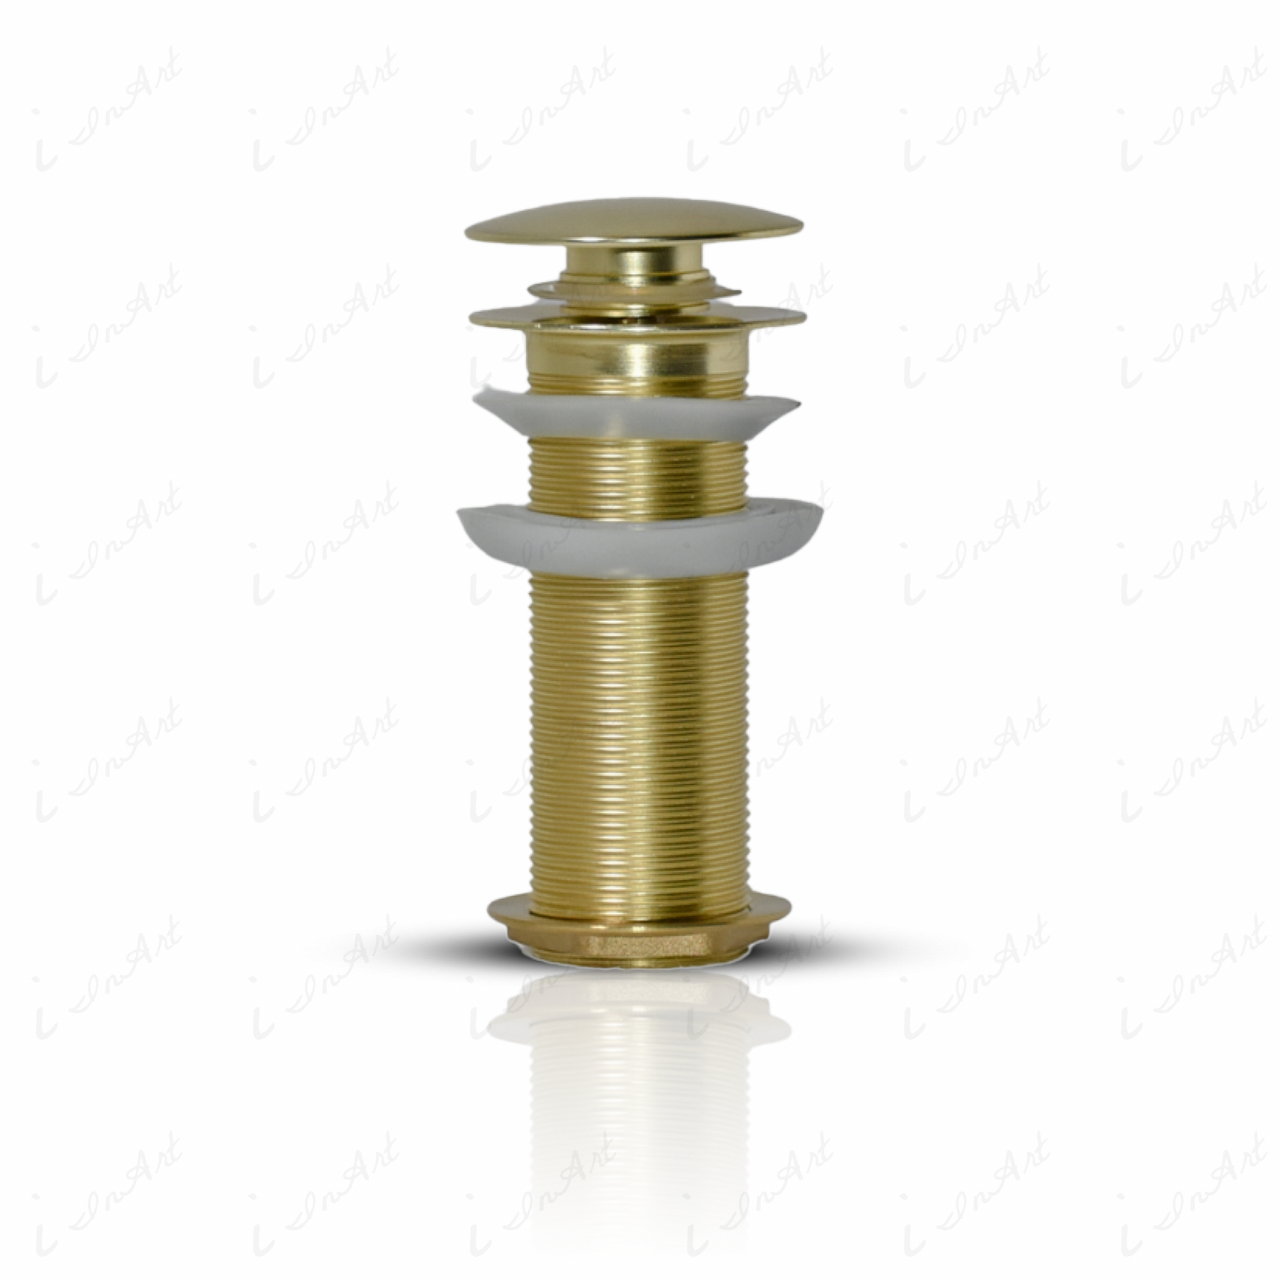 InArt Brass Full Threaded Pop Up Waste Coupling 32 MM 5", Brass Top (Gold) Satin Finish - InArt-Studio